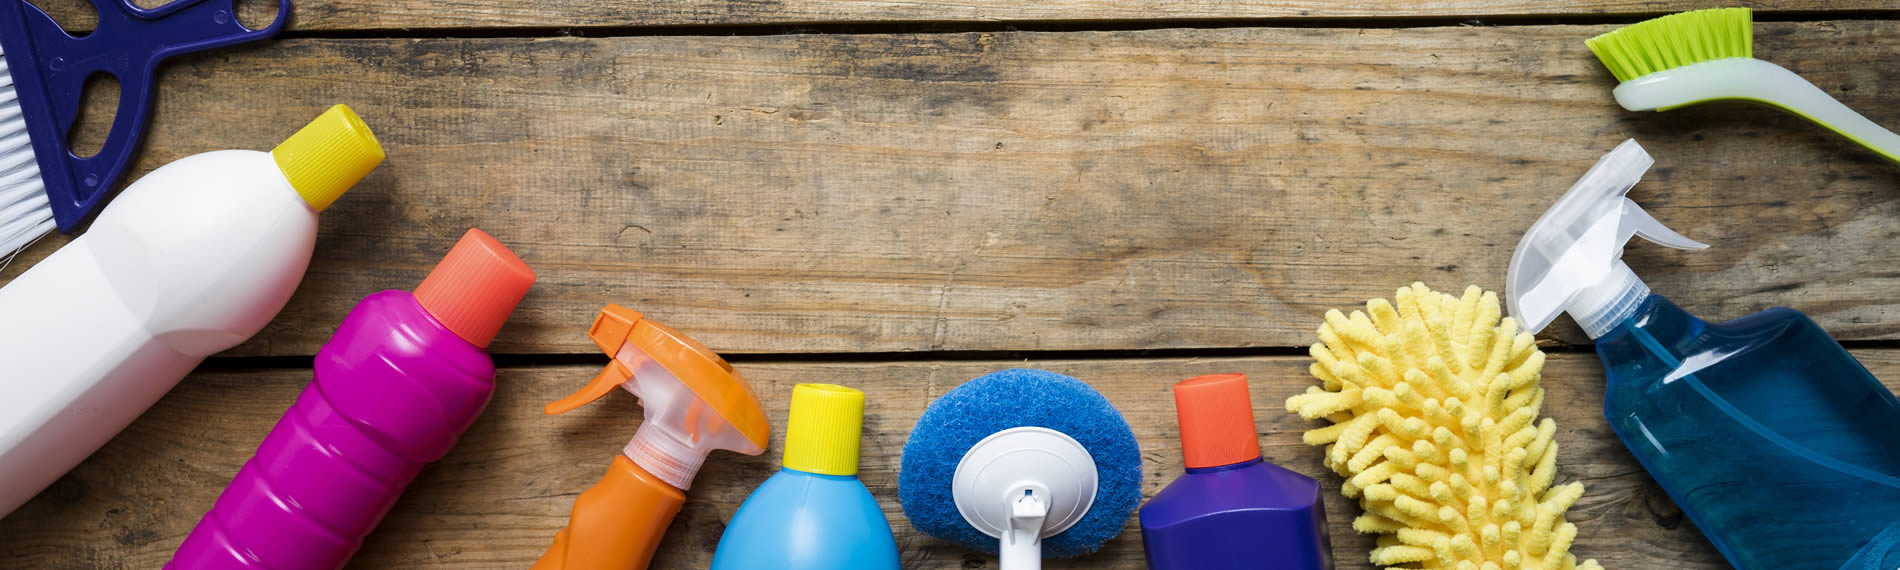 Cleaning materials for end-of-tenancy clean